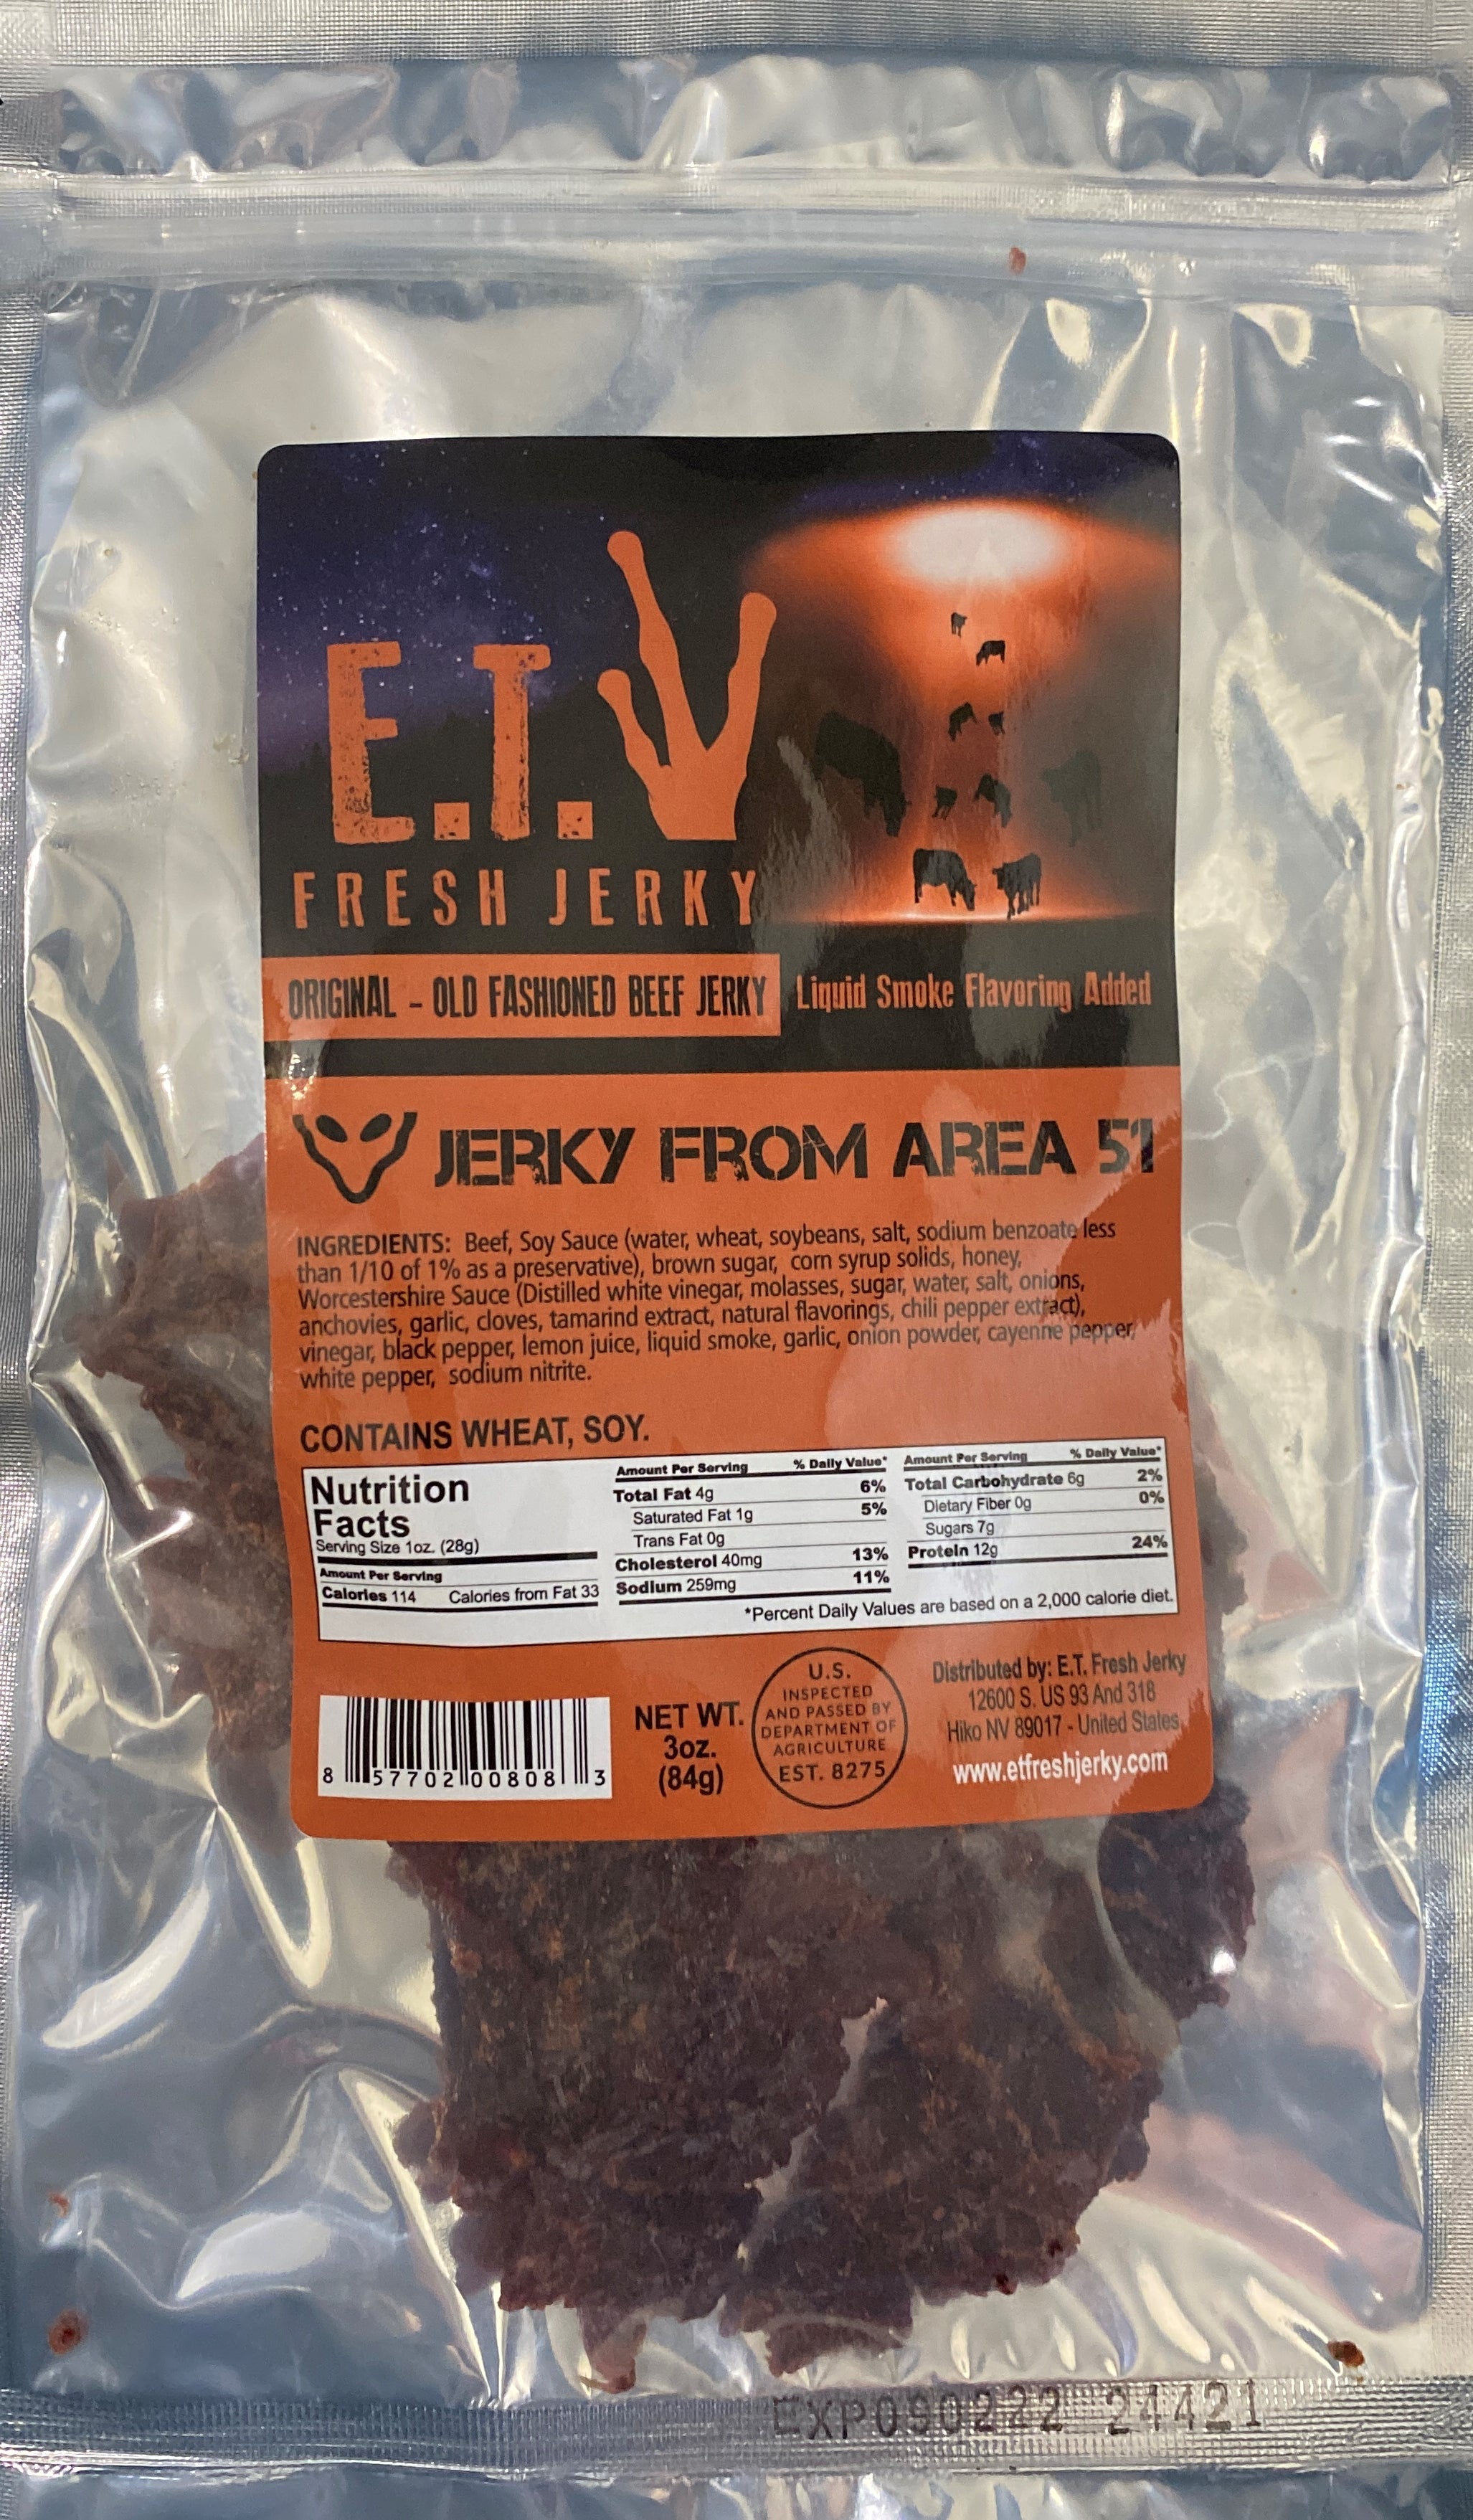 Original/Old Fashioned Beef Jerky